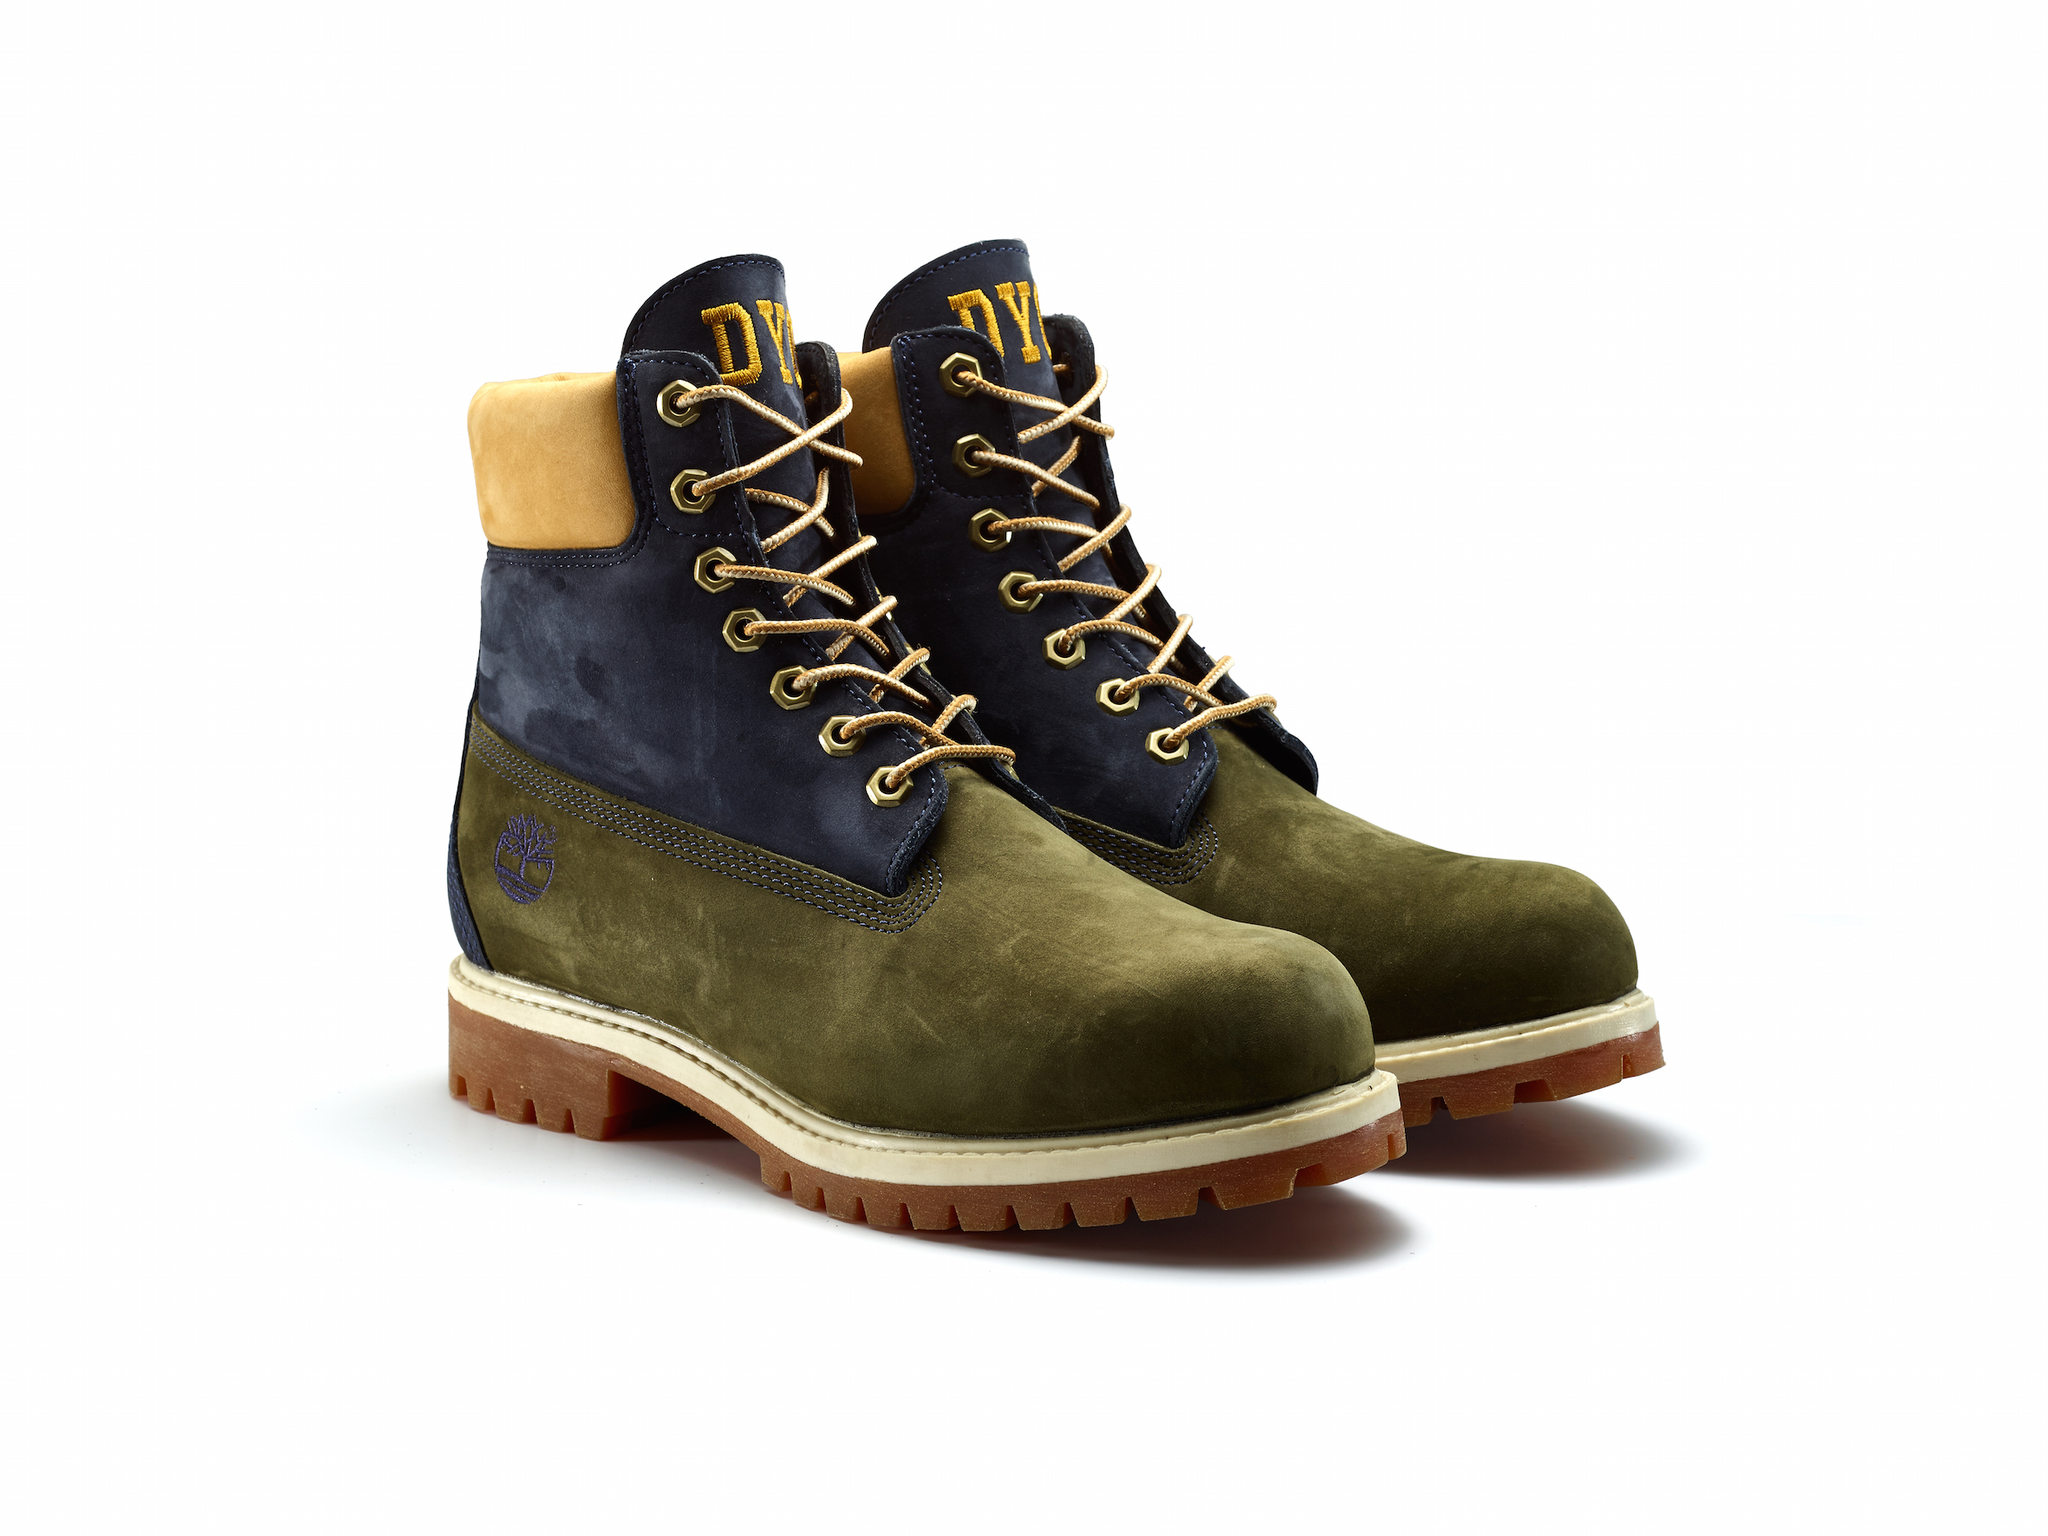 DYO – Design Your Own di Timberland